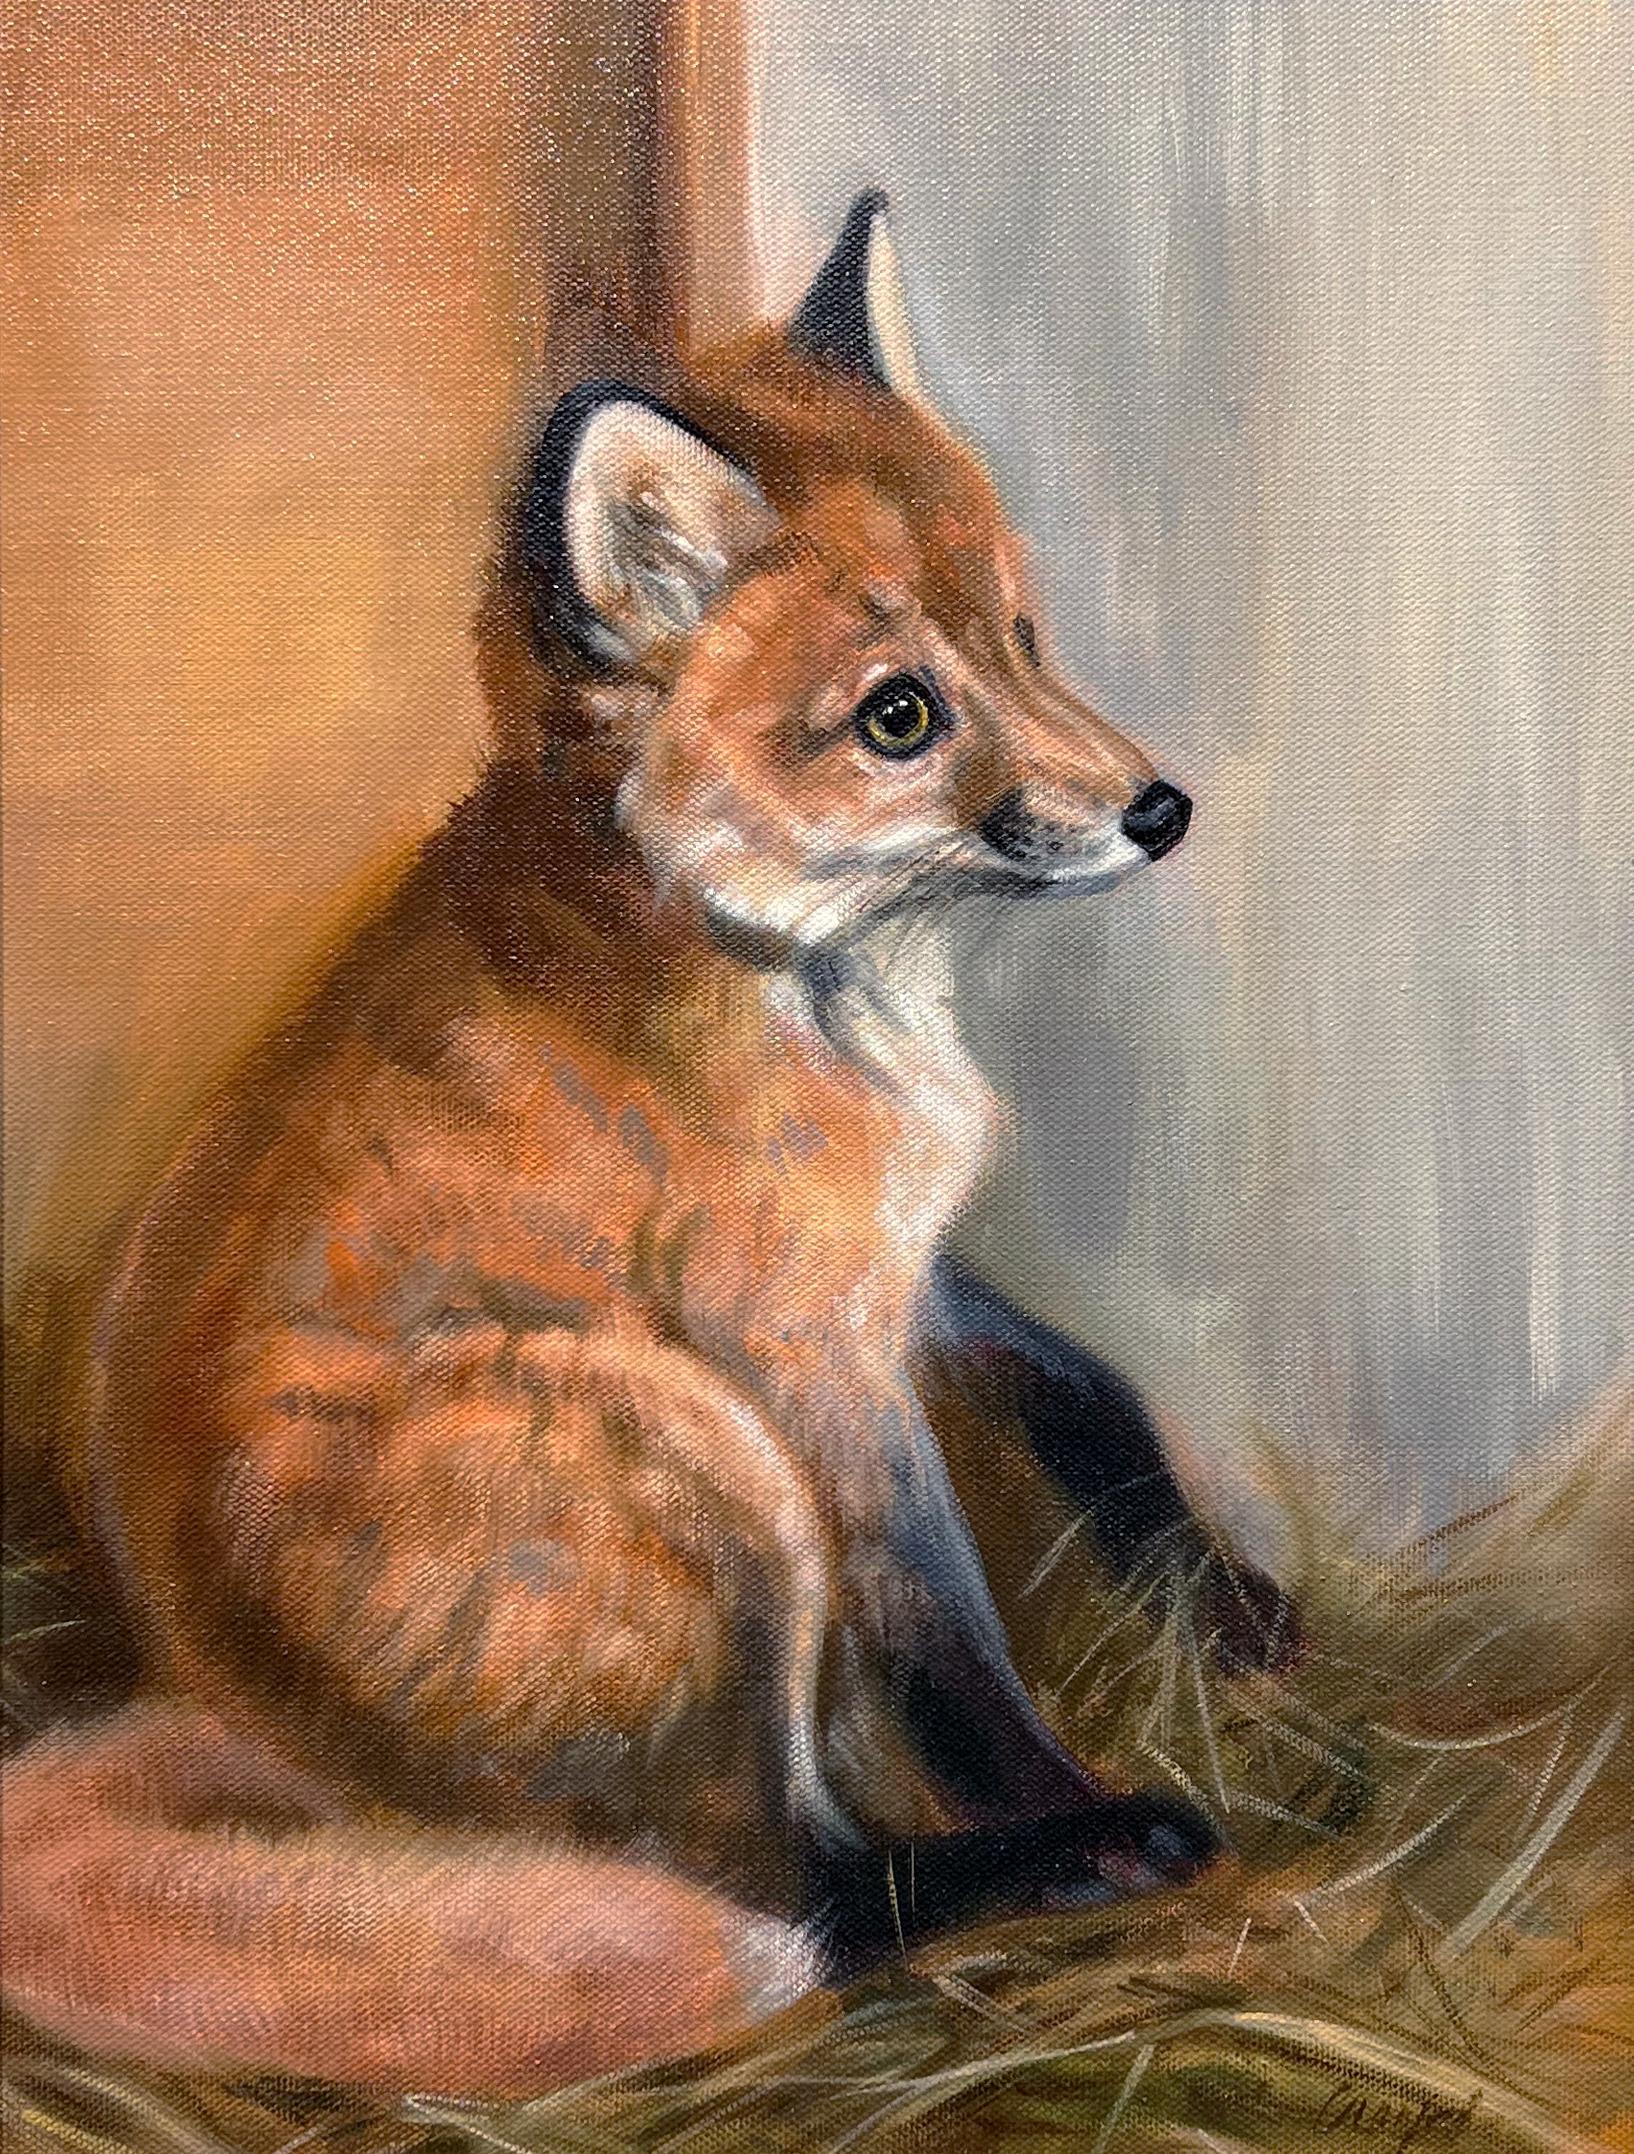 Janet Crawford, "Little Tod", 16x12 Baby Fox Animal Portrait Oil Painting